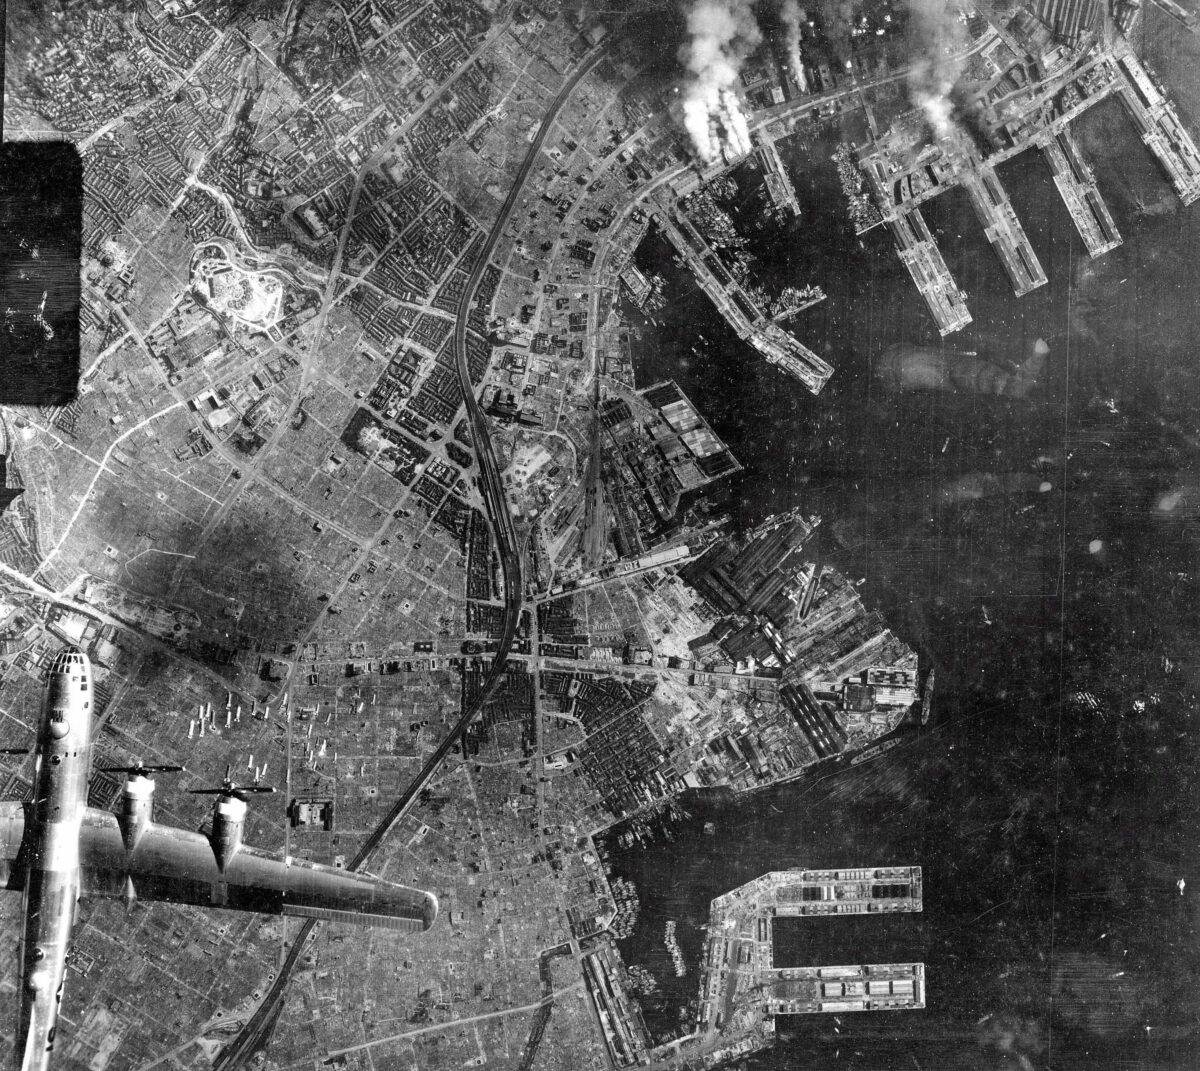 The bombing of the Japanese city